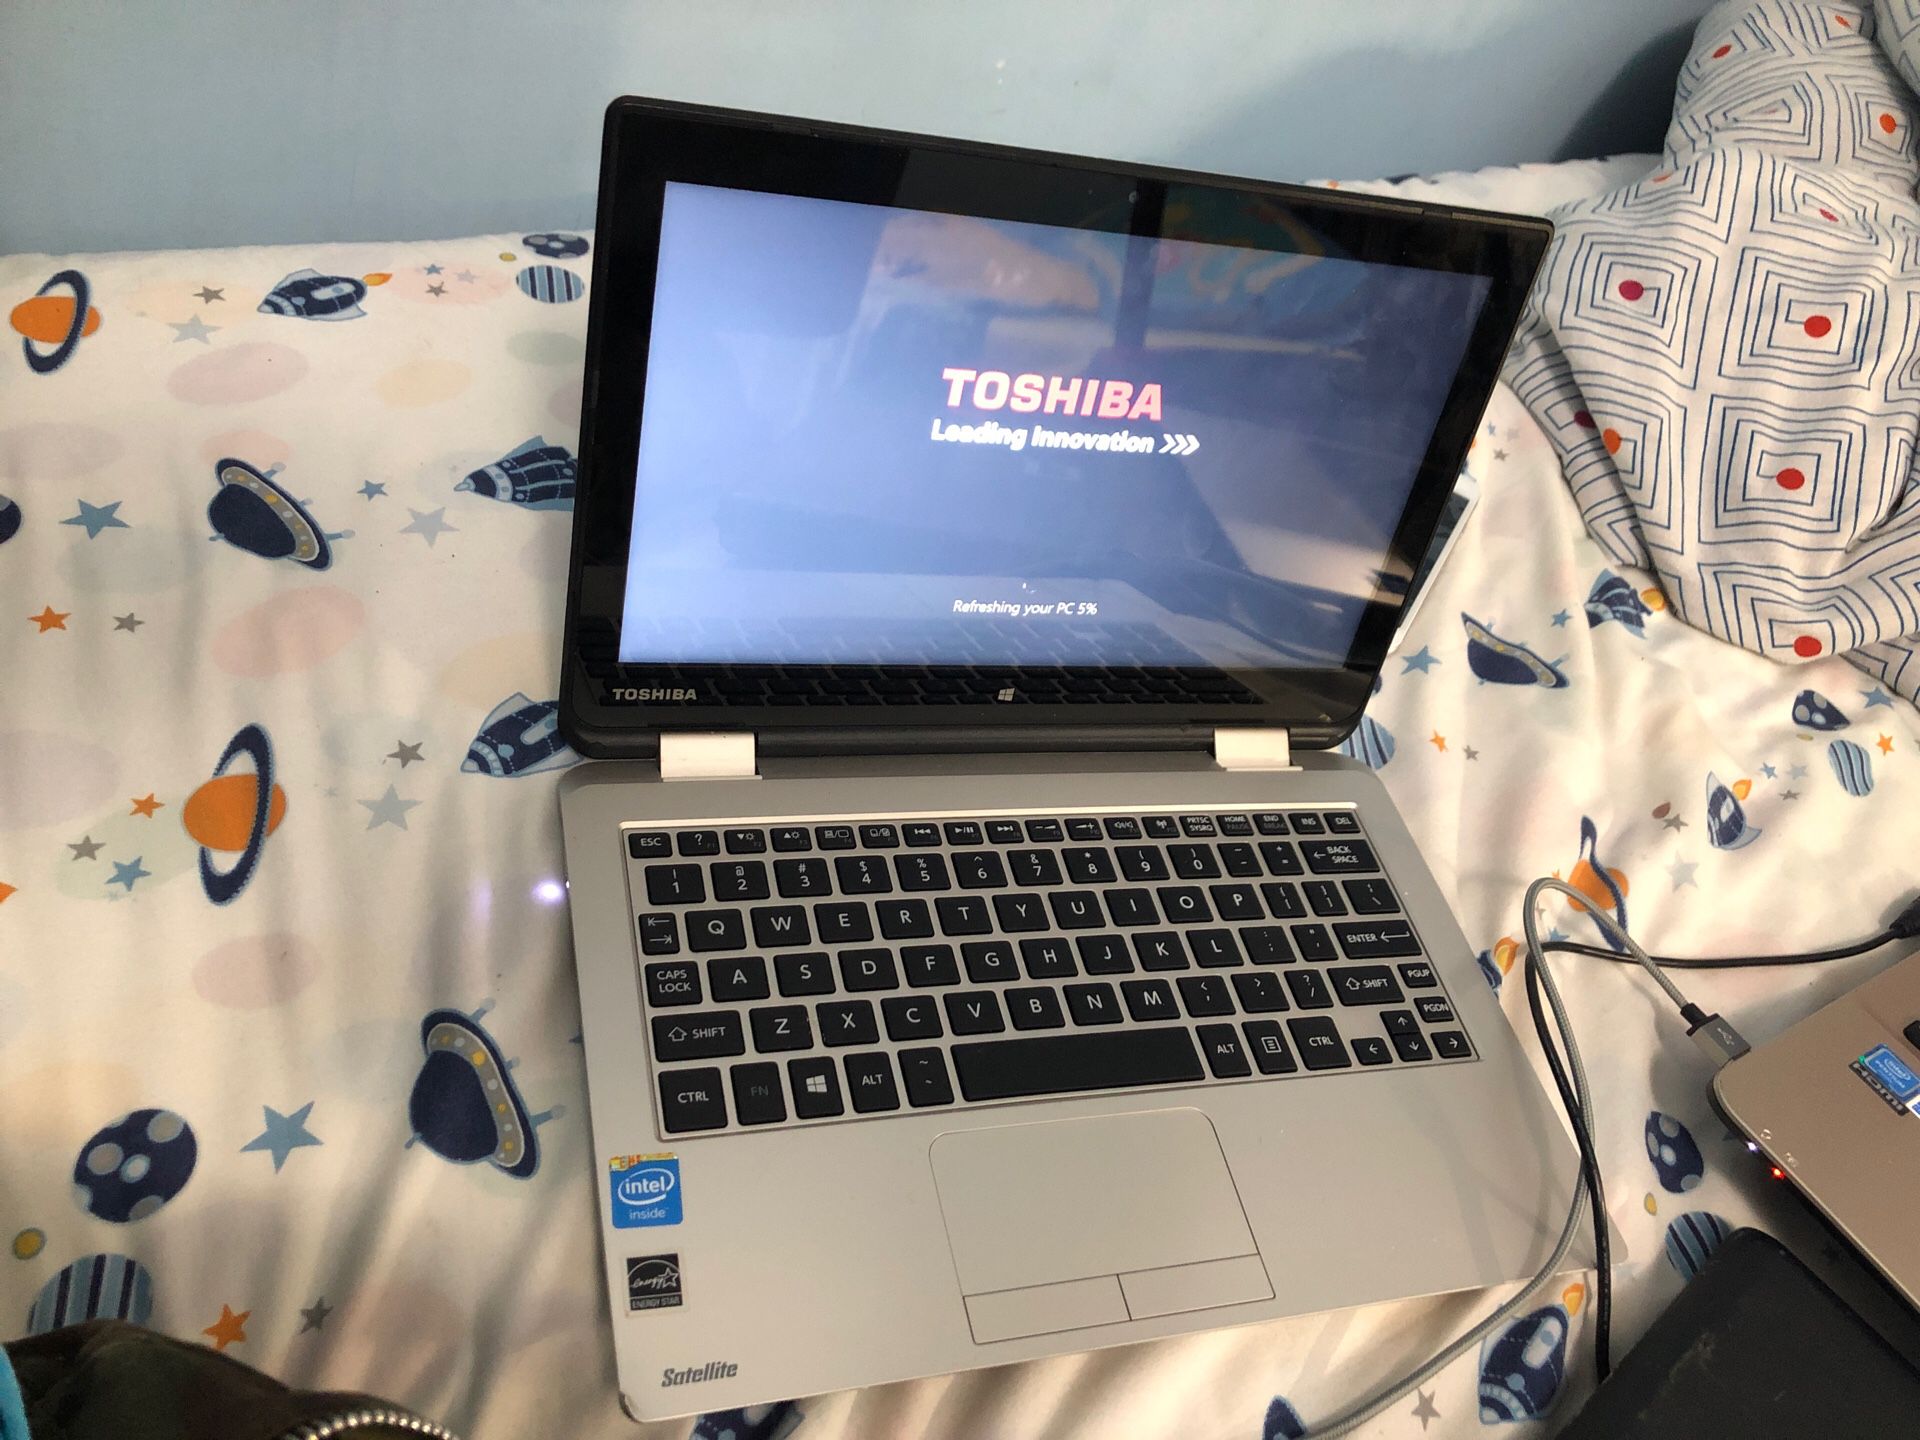 Toshiba laptop two years old. Like new. Nothing wrong with it